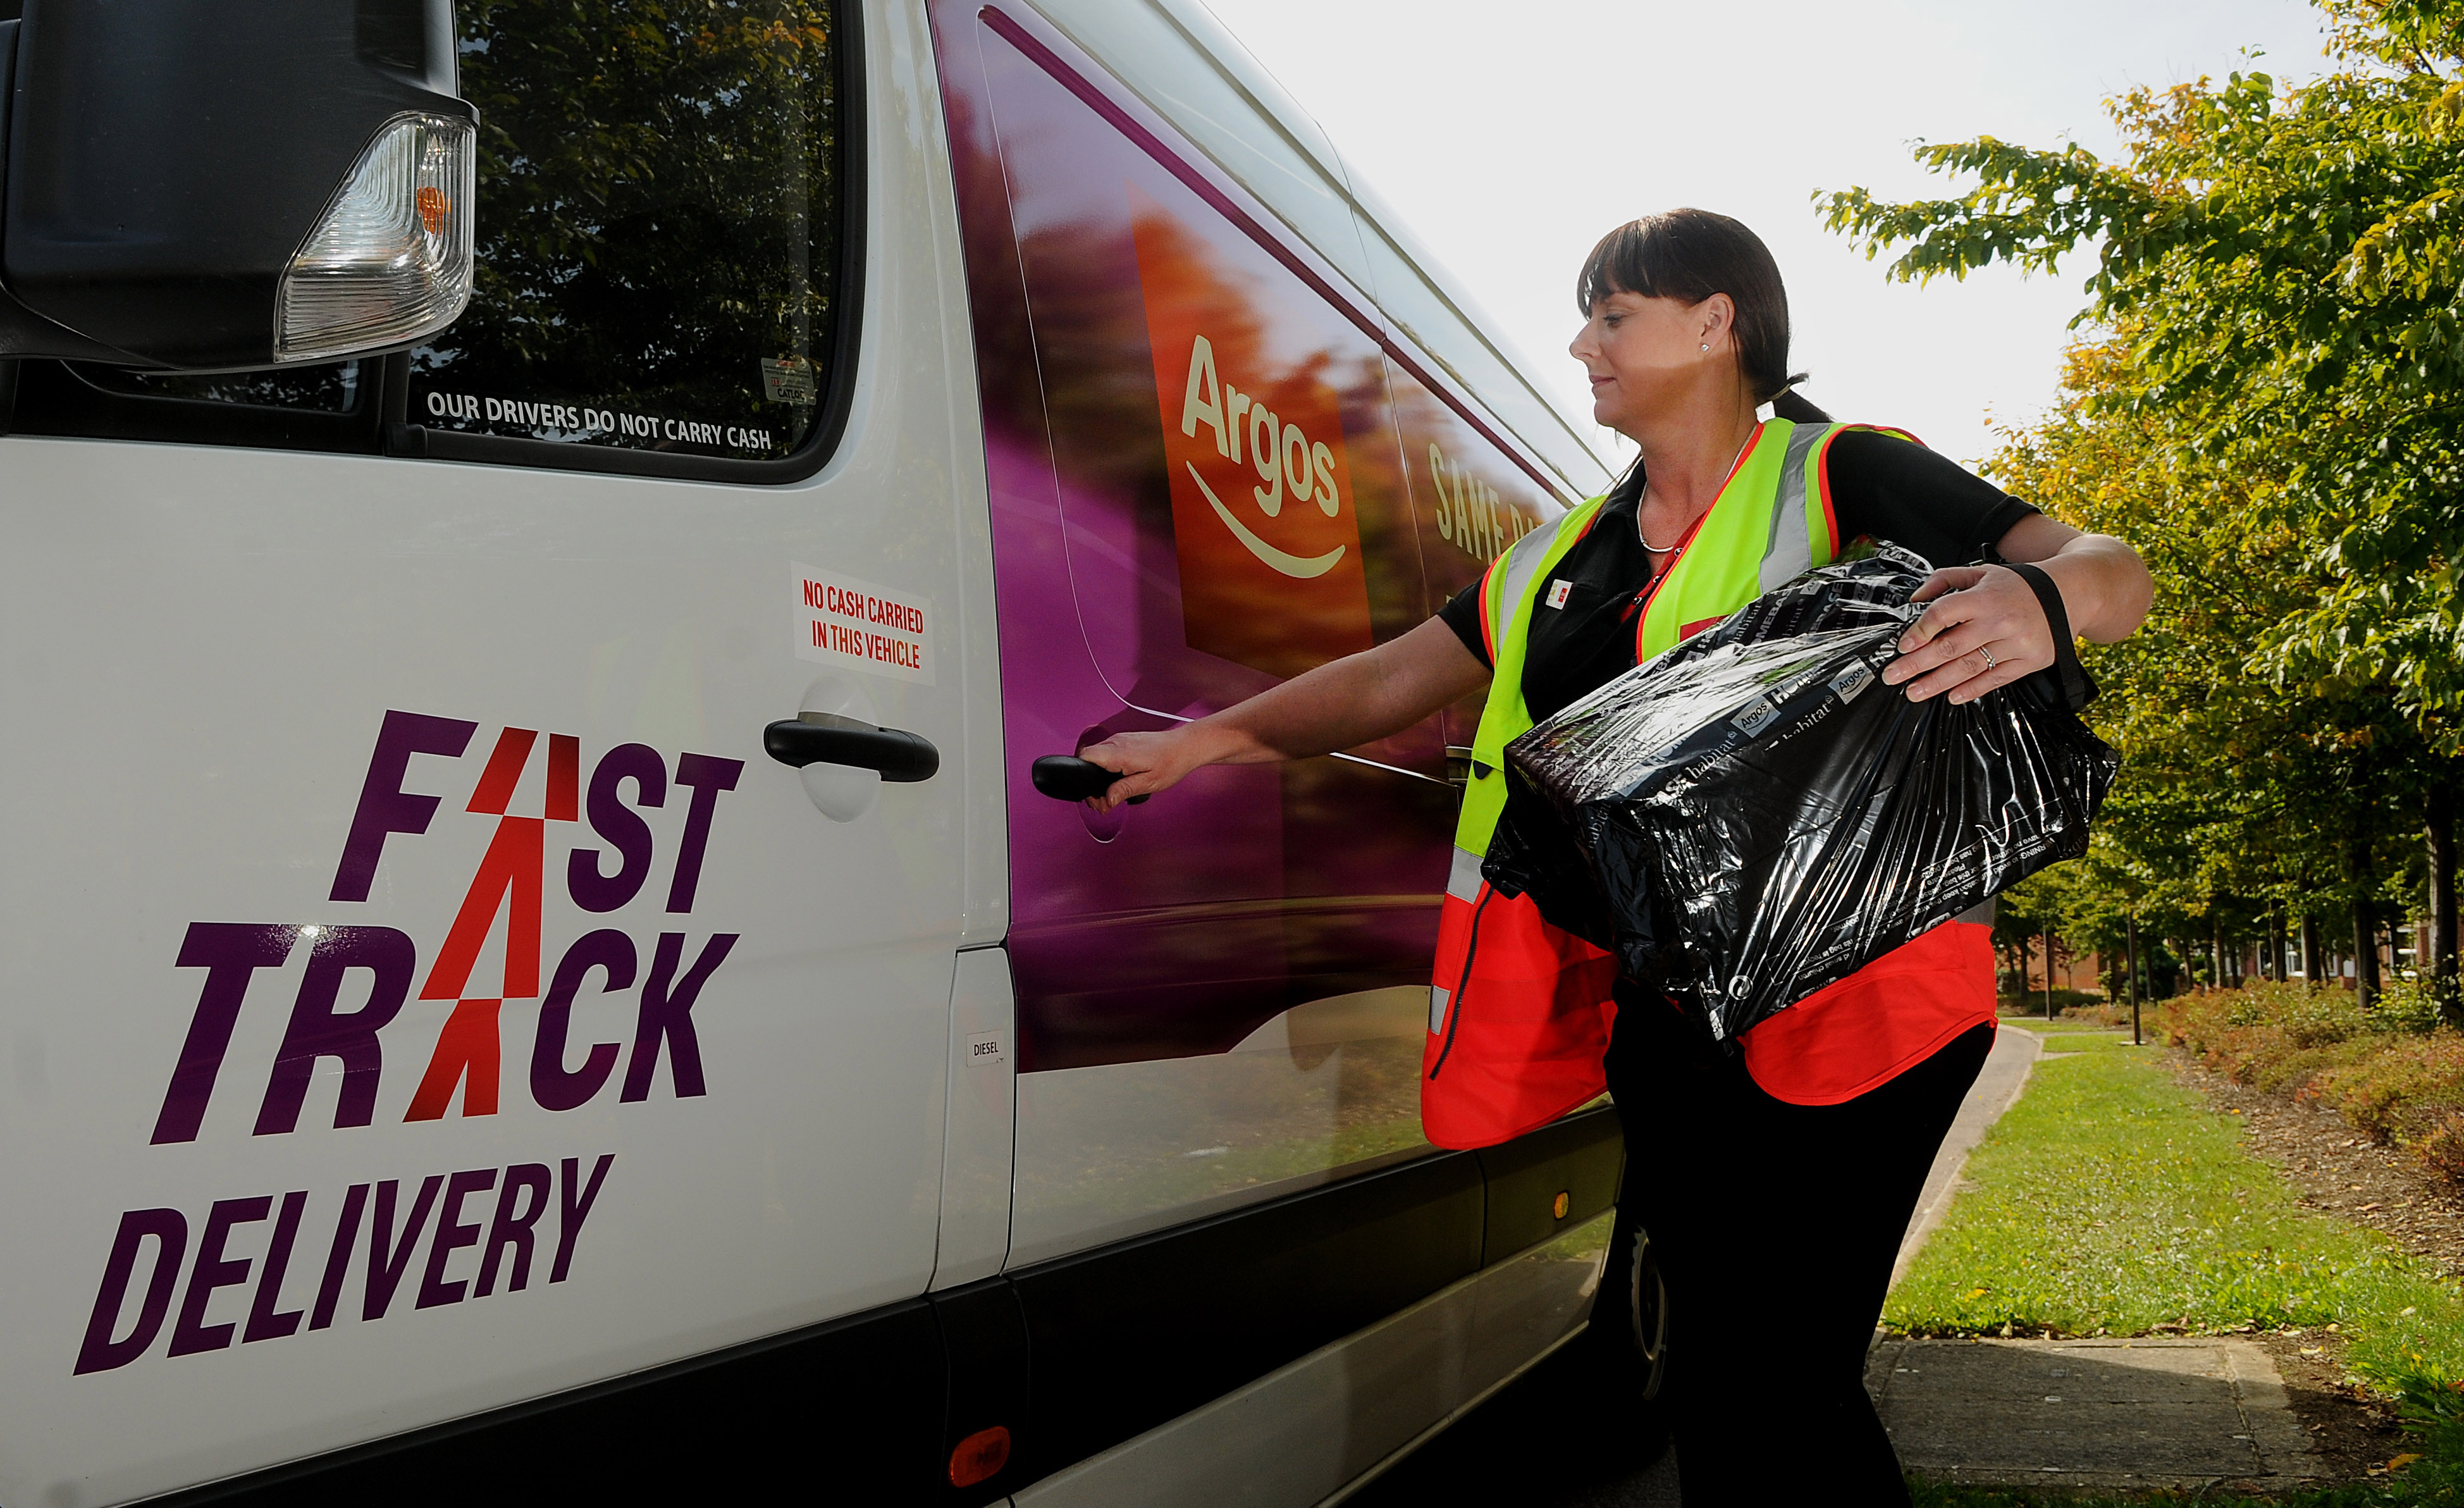 PR PHOTO. Free Editorial Use. Argos Launch NEW Same Day Delivery Service.